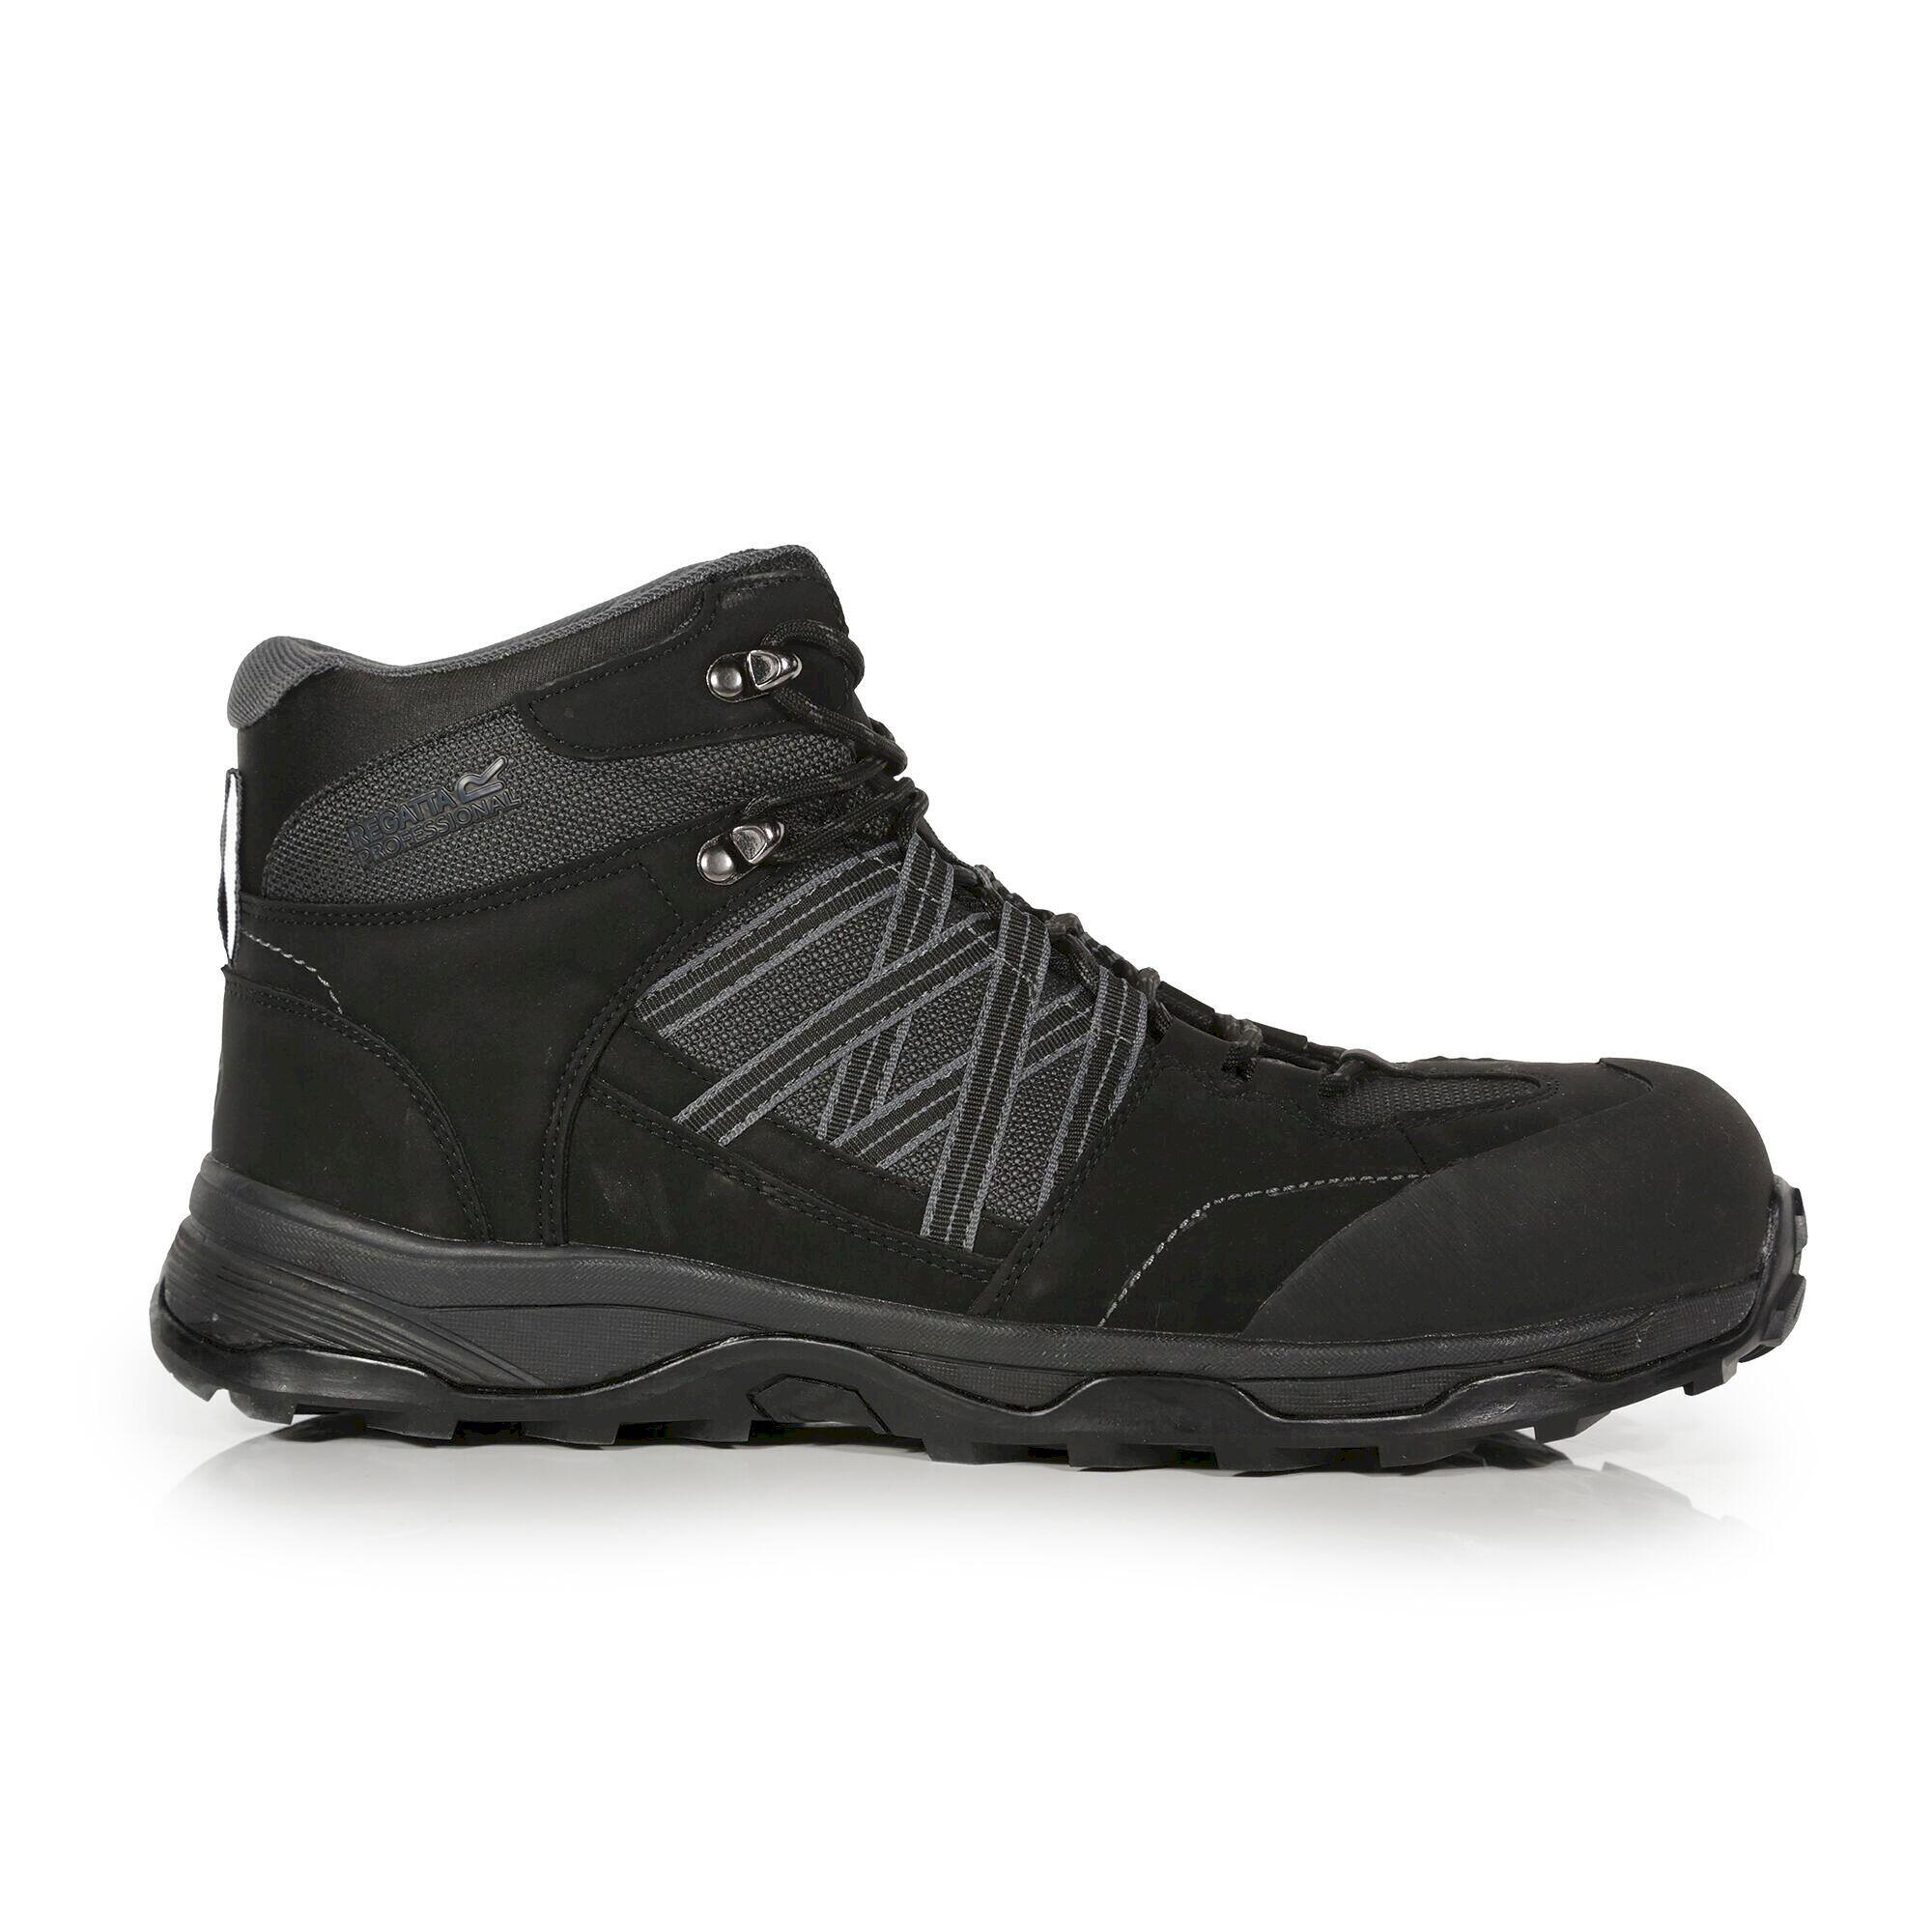 Mens Claystone S3 Safety Boots (Black/Granite) 4/5